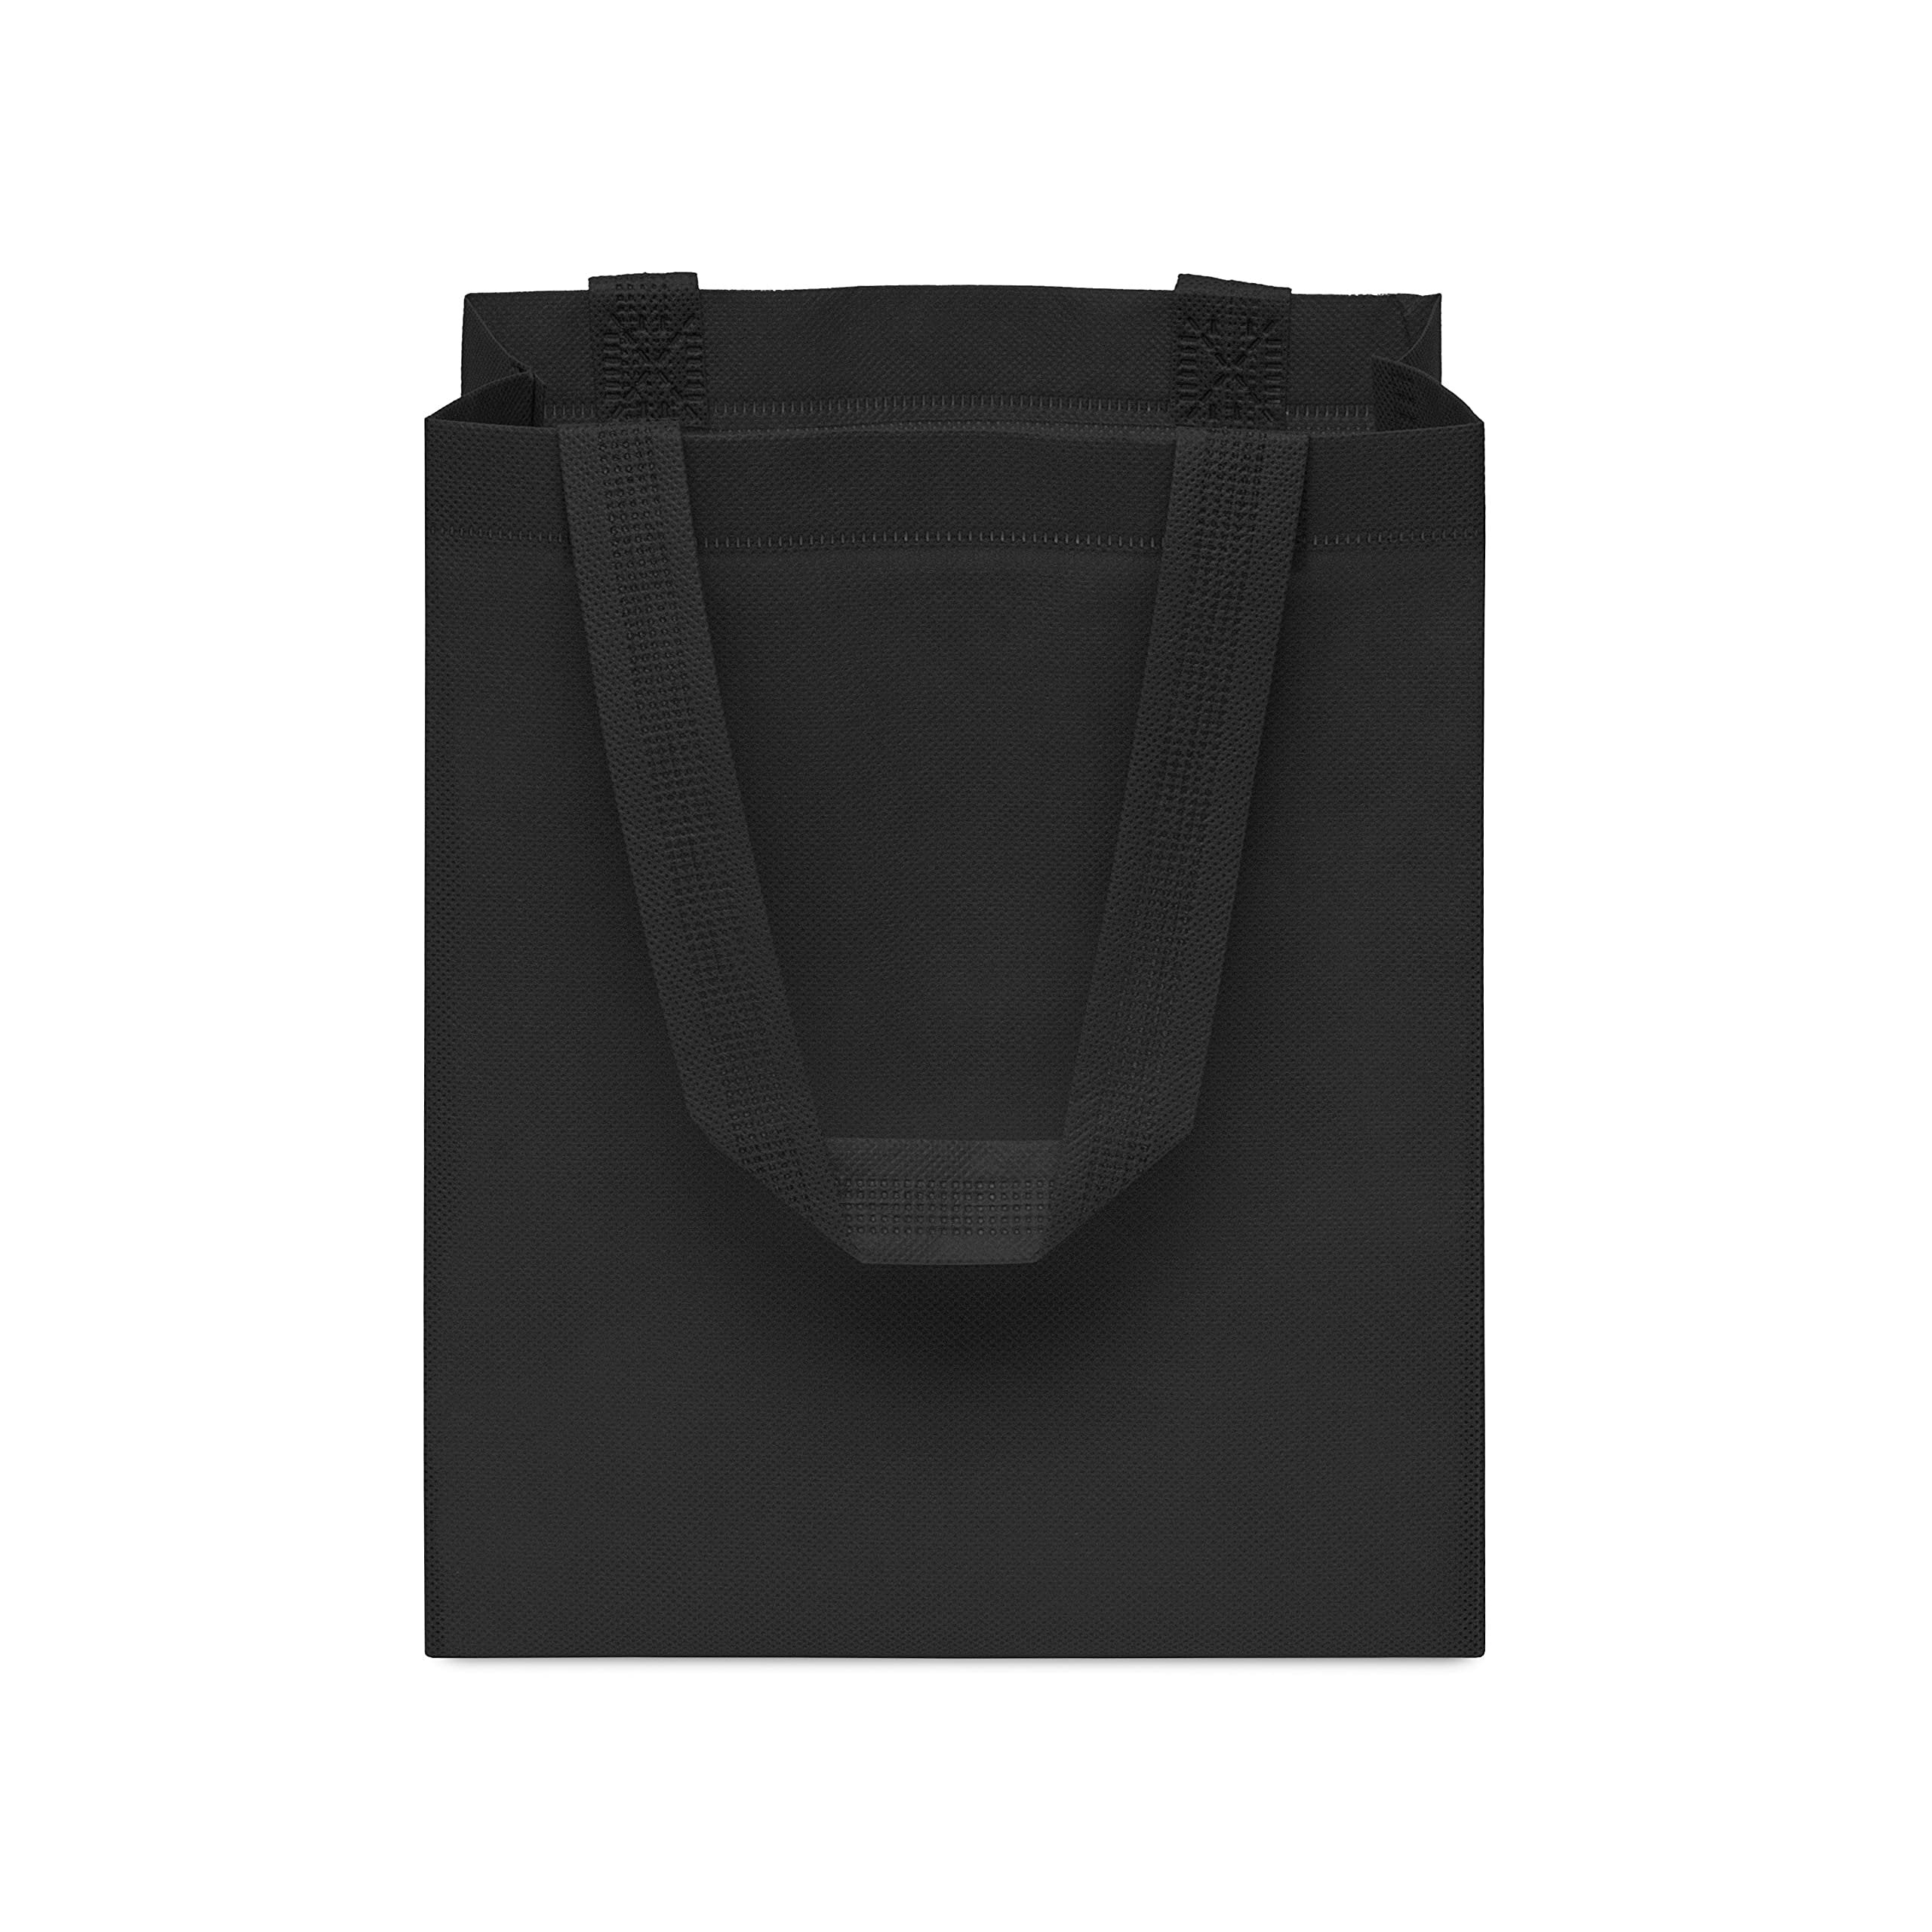 Reusable Gift Bags 12pk Small Black Eco-Friendly Fabric Totes for Shopping & Events - 8x4x10in